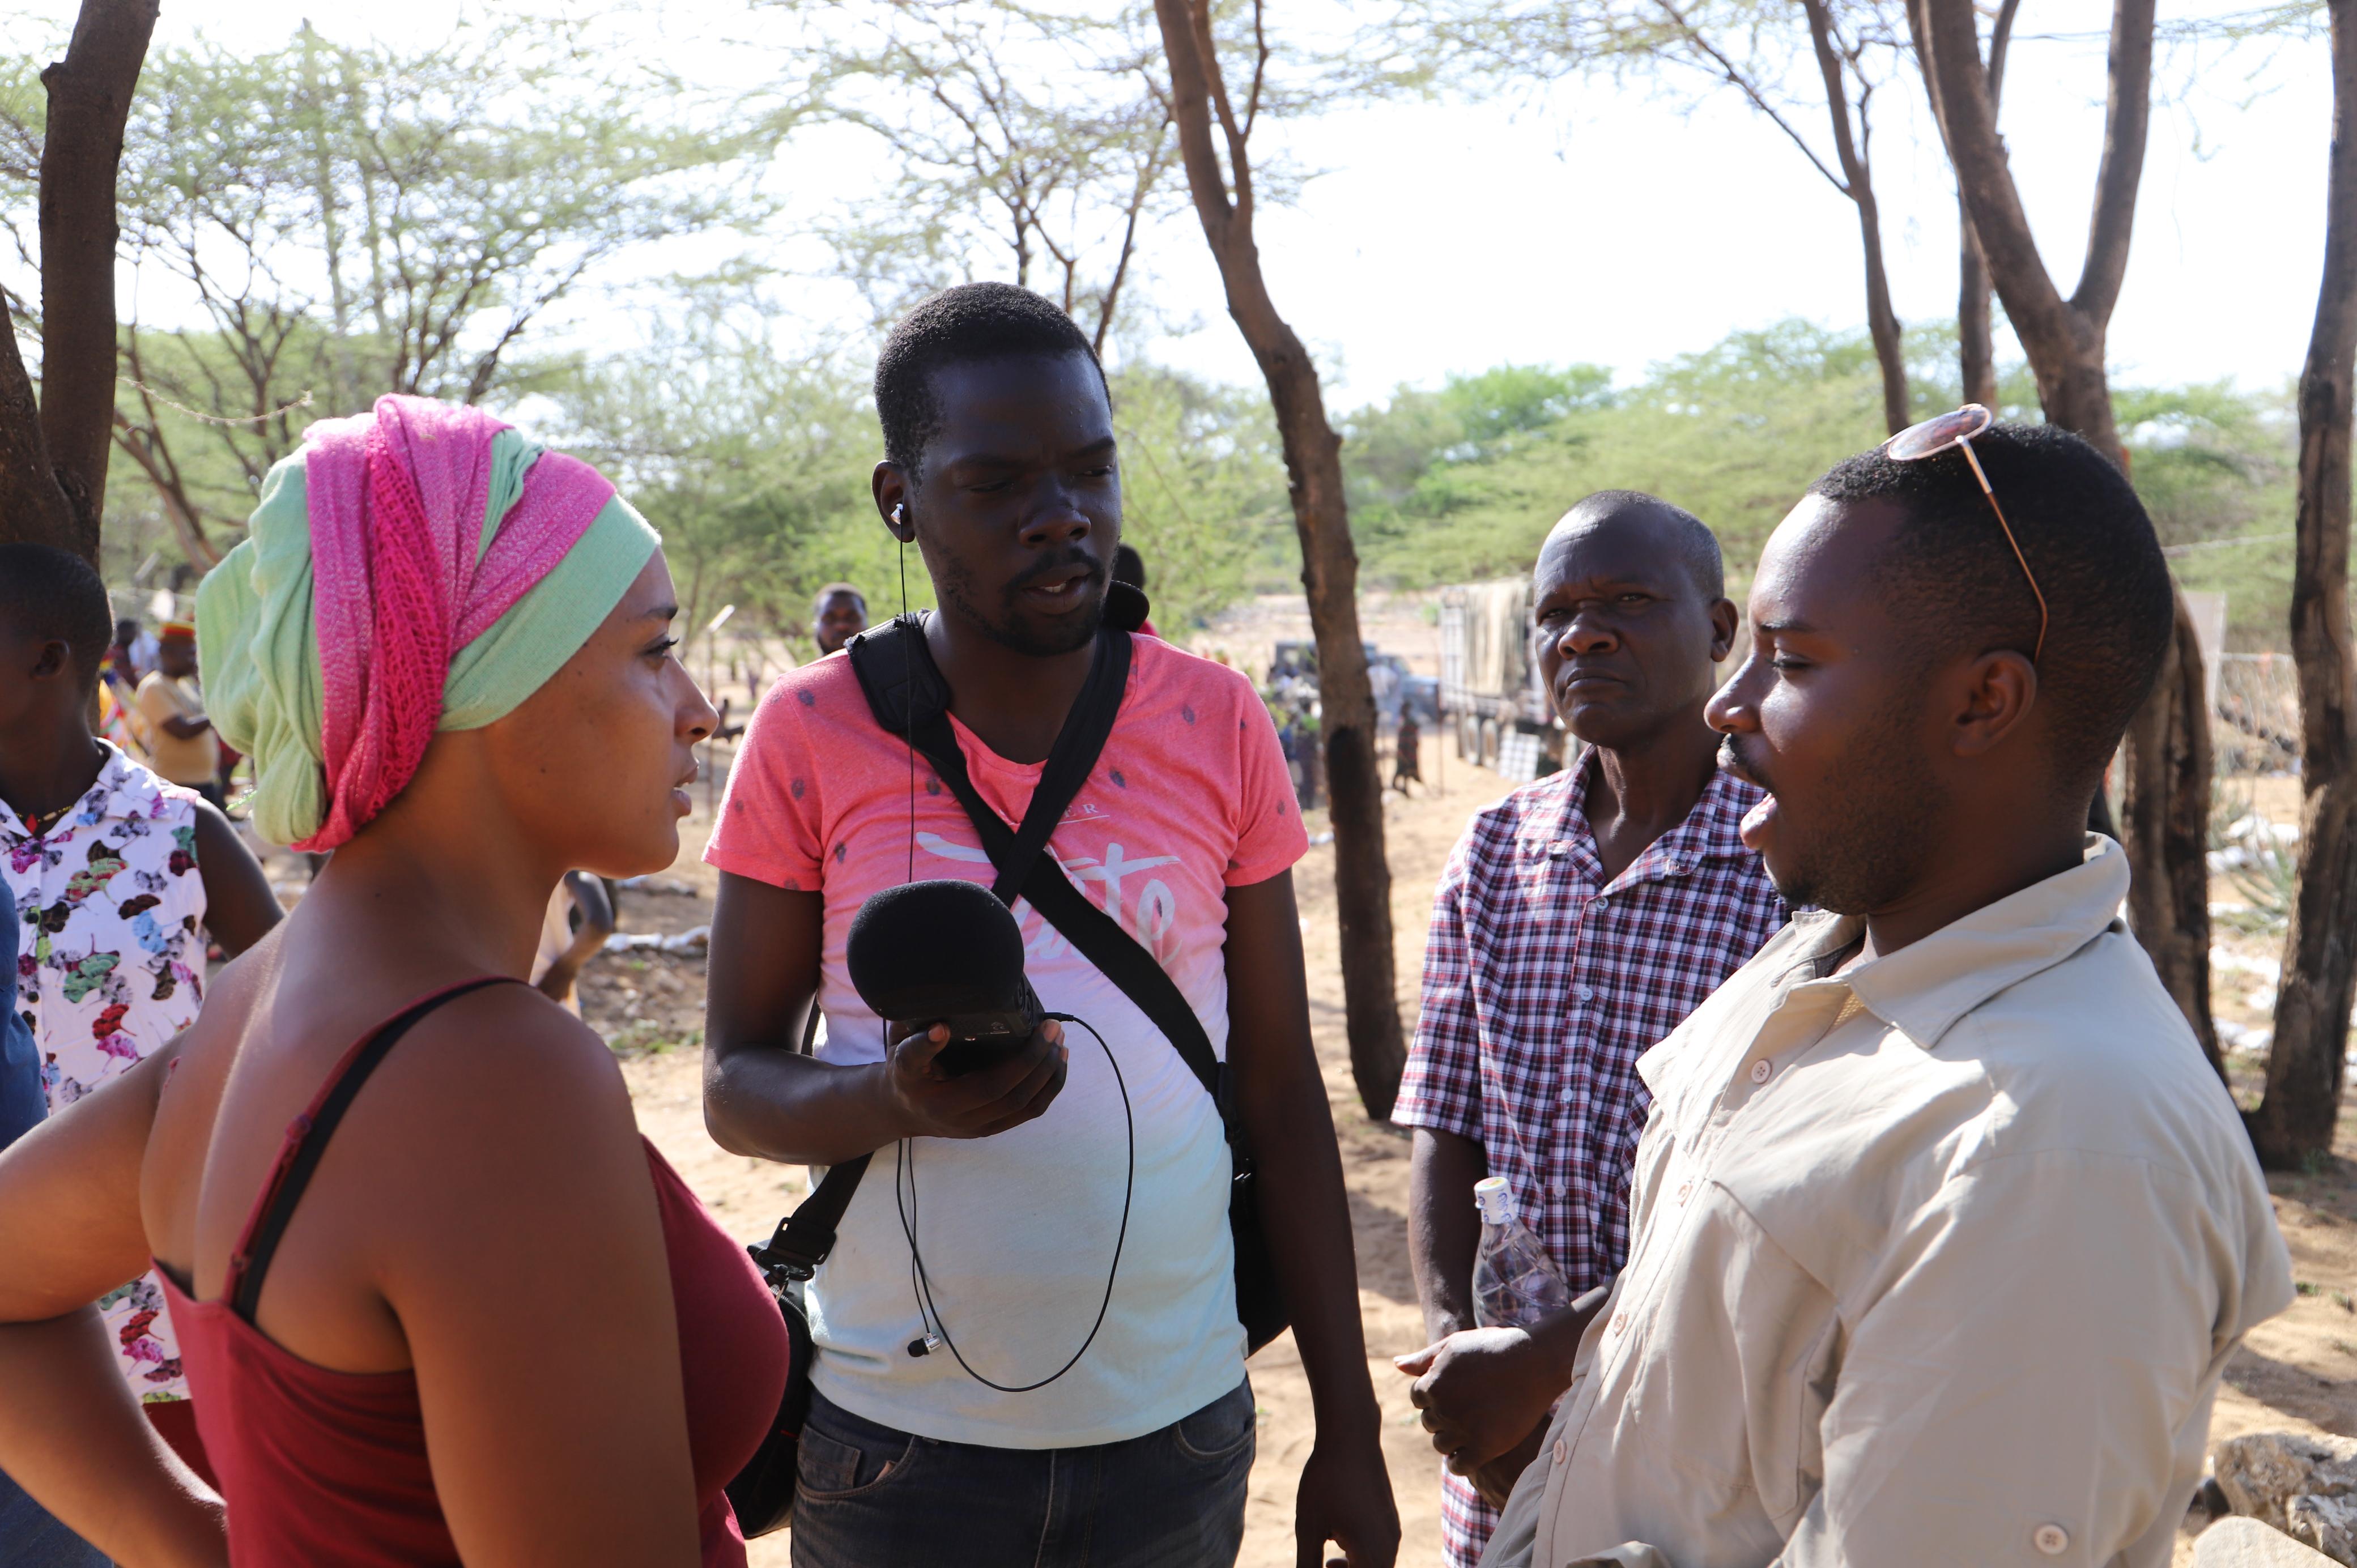 From Left: Storytellers Mara Menzies and John Namai interview Obed Tuyumvire, an entrepreneur (right) at the Lokiriama Peace Accord Commemoration in Lokiriama village, Turkana County, Kenya. Looking on is Turkana County Meteorological Services Director Francis Muinda.